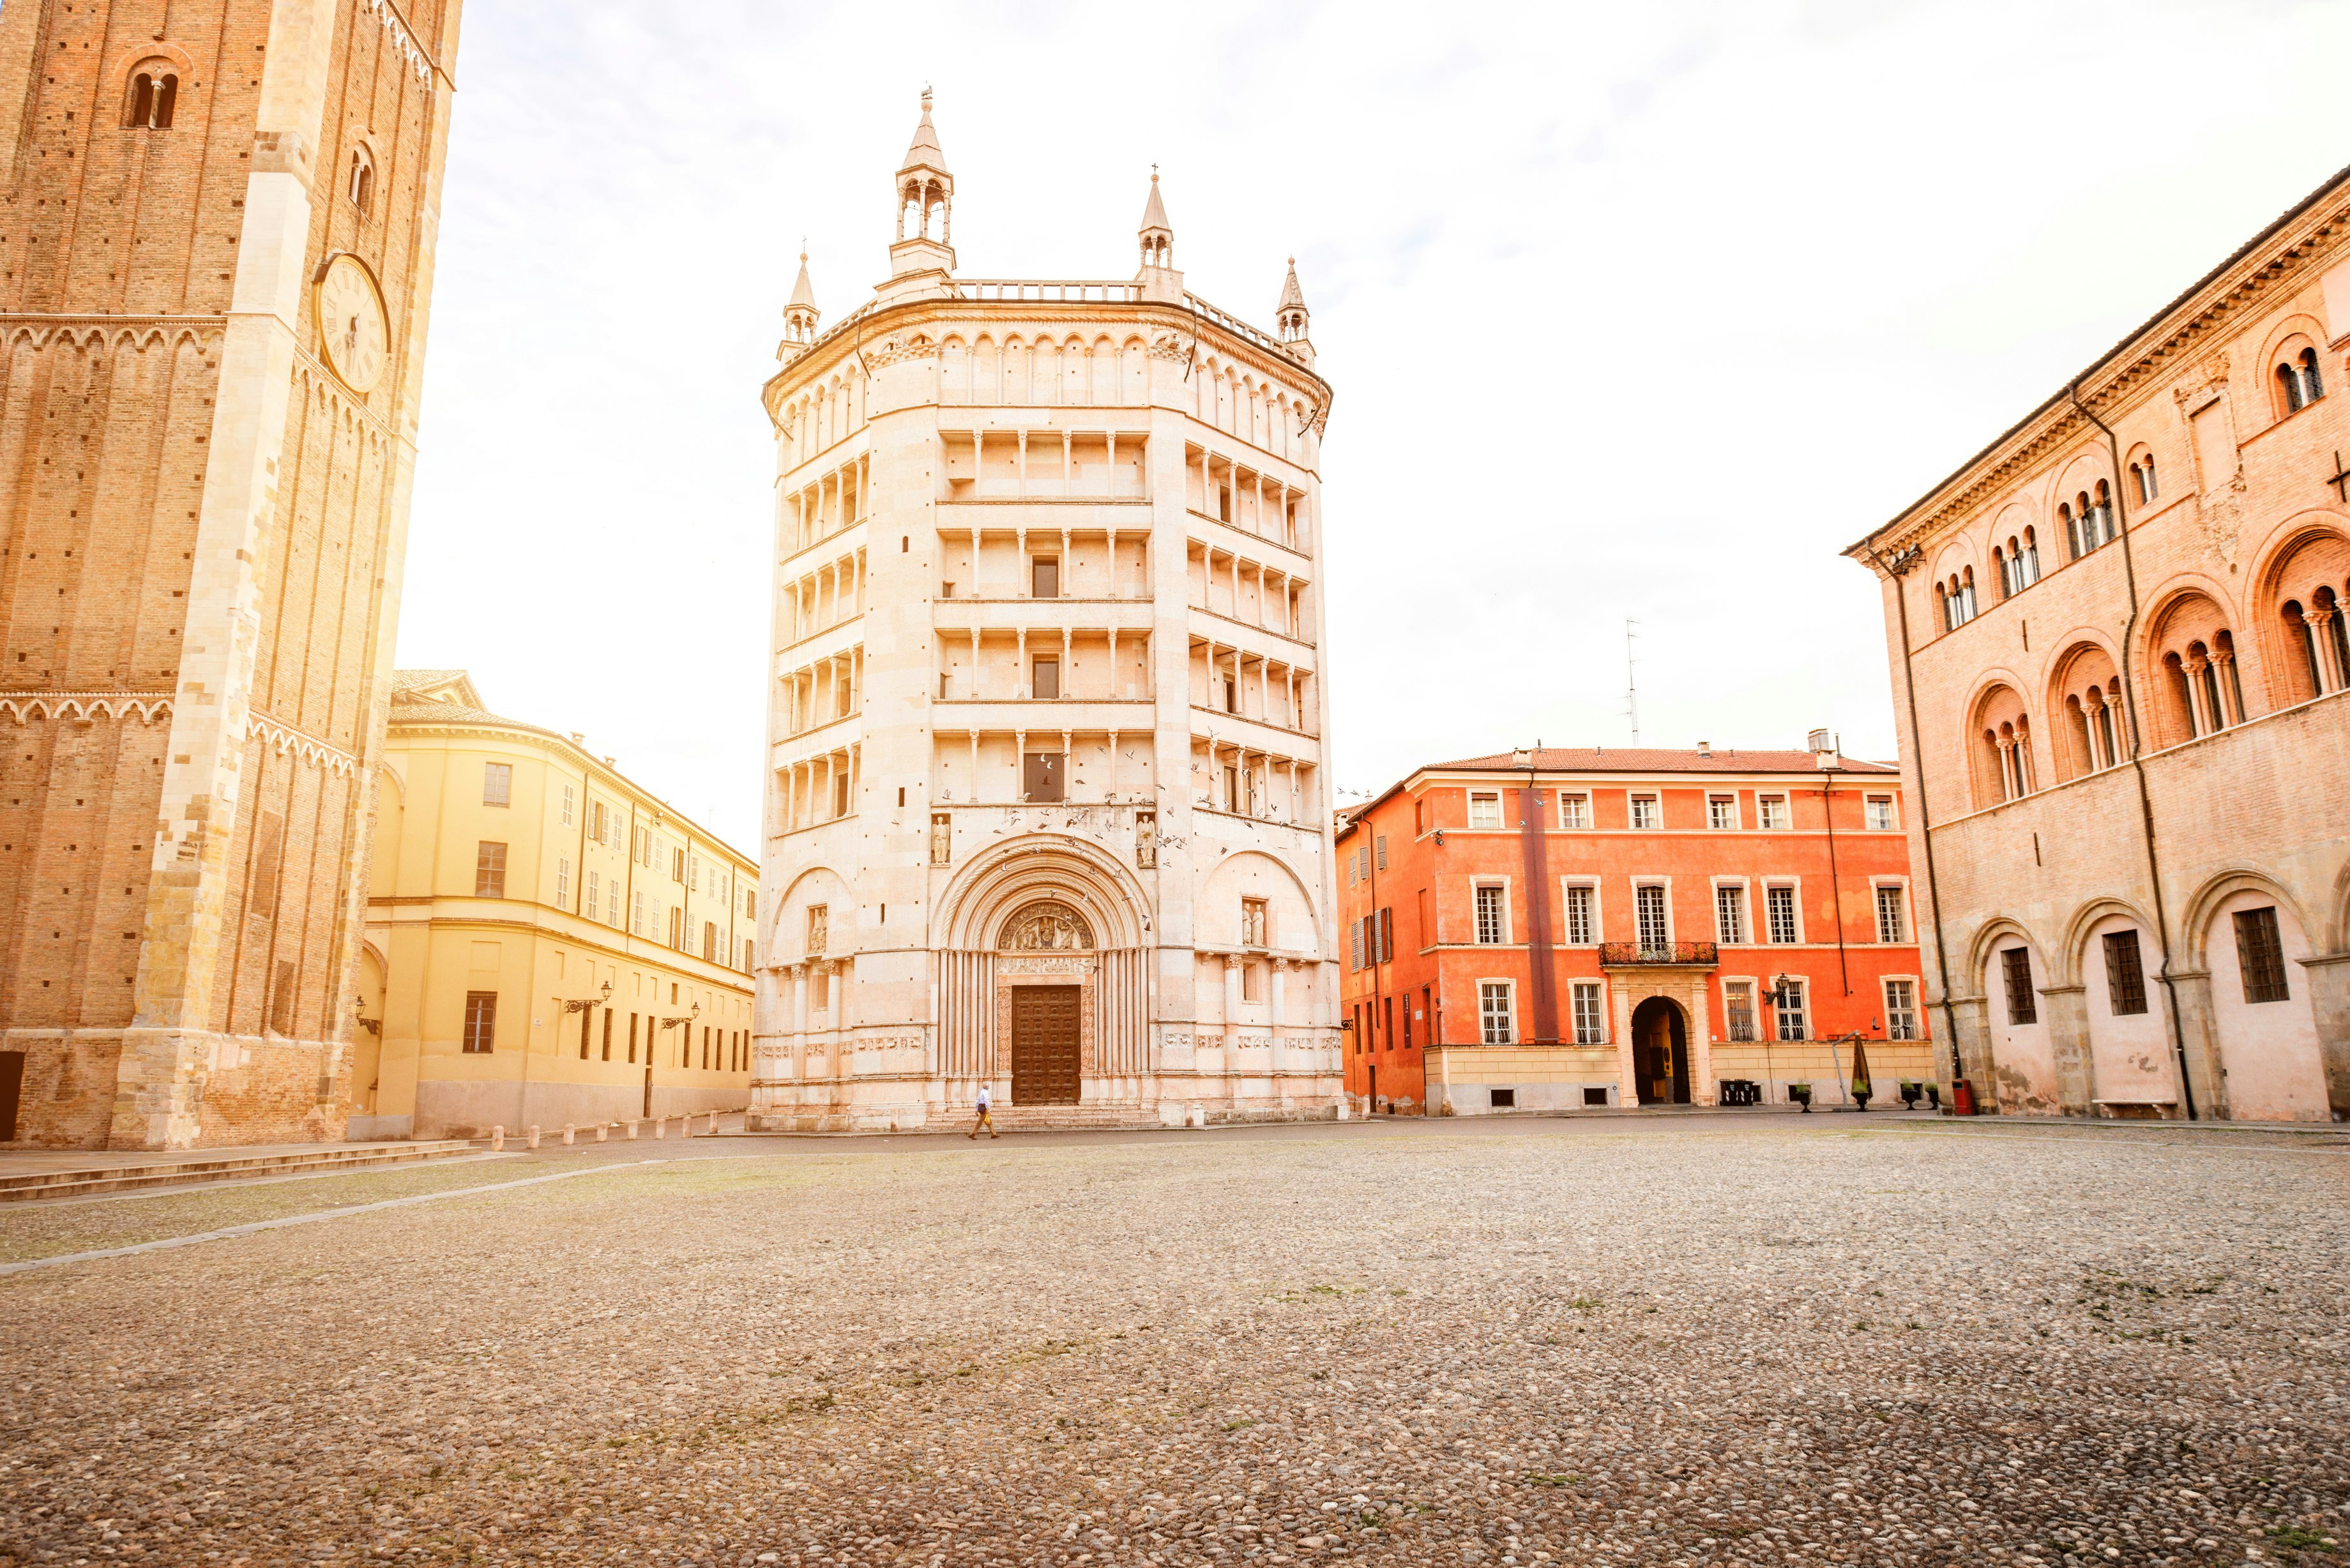 Parma cathedral with Baptistery leaning tower on the central square in Parma town in Italy.